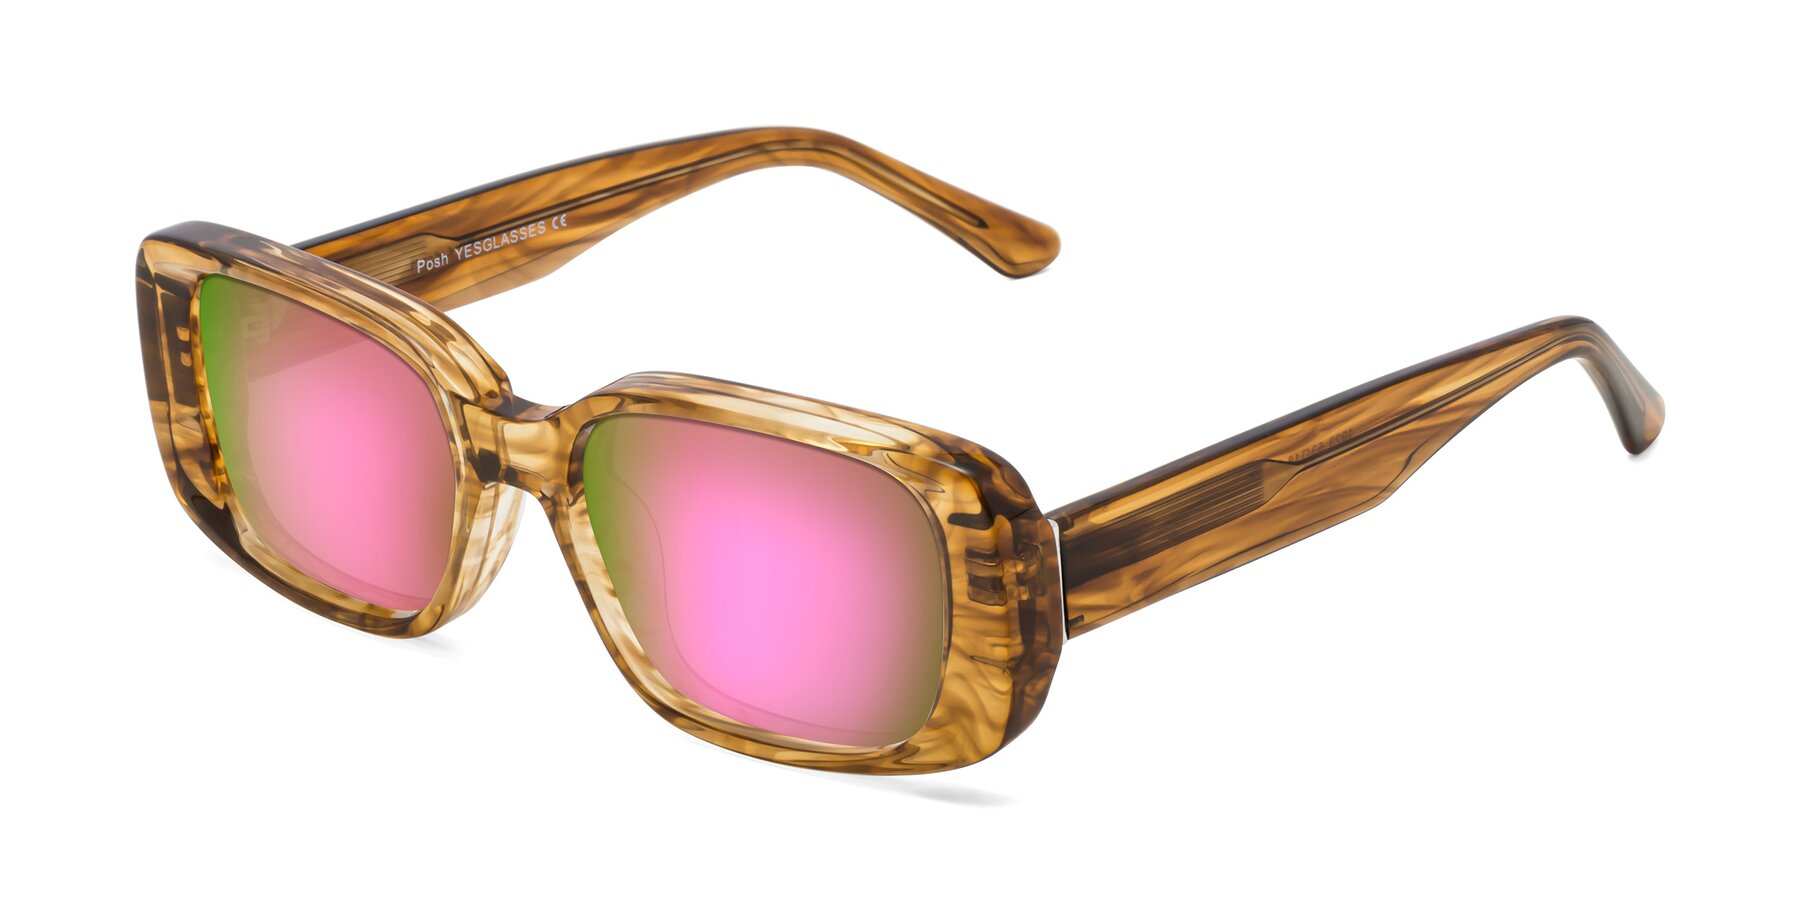 Angle of Posh in Stripe Amber with Pink Mirrored Lenses